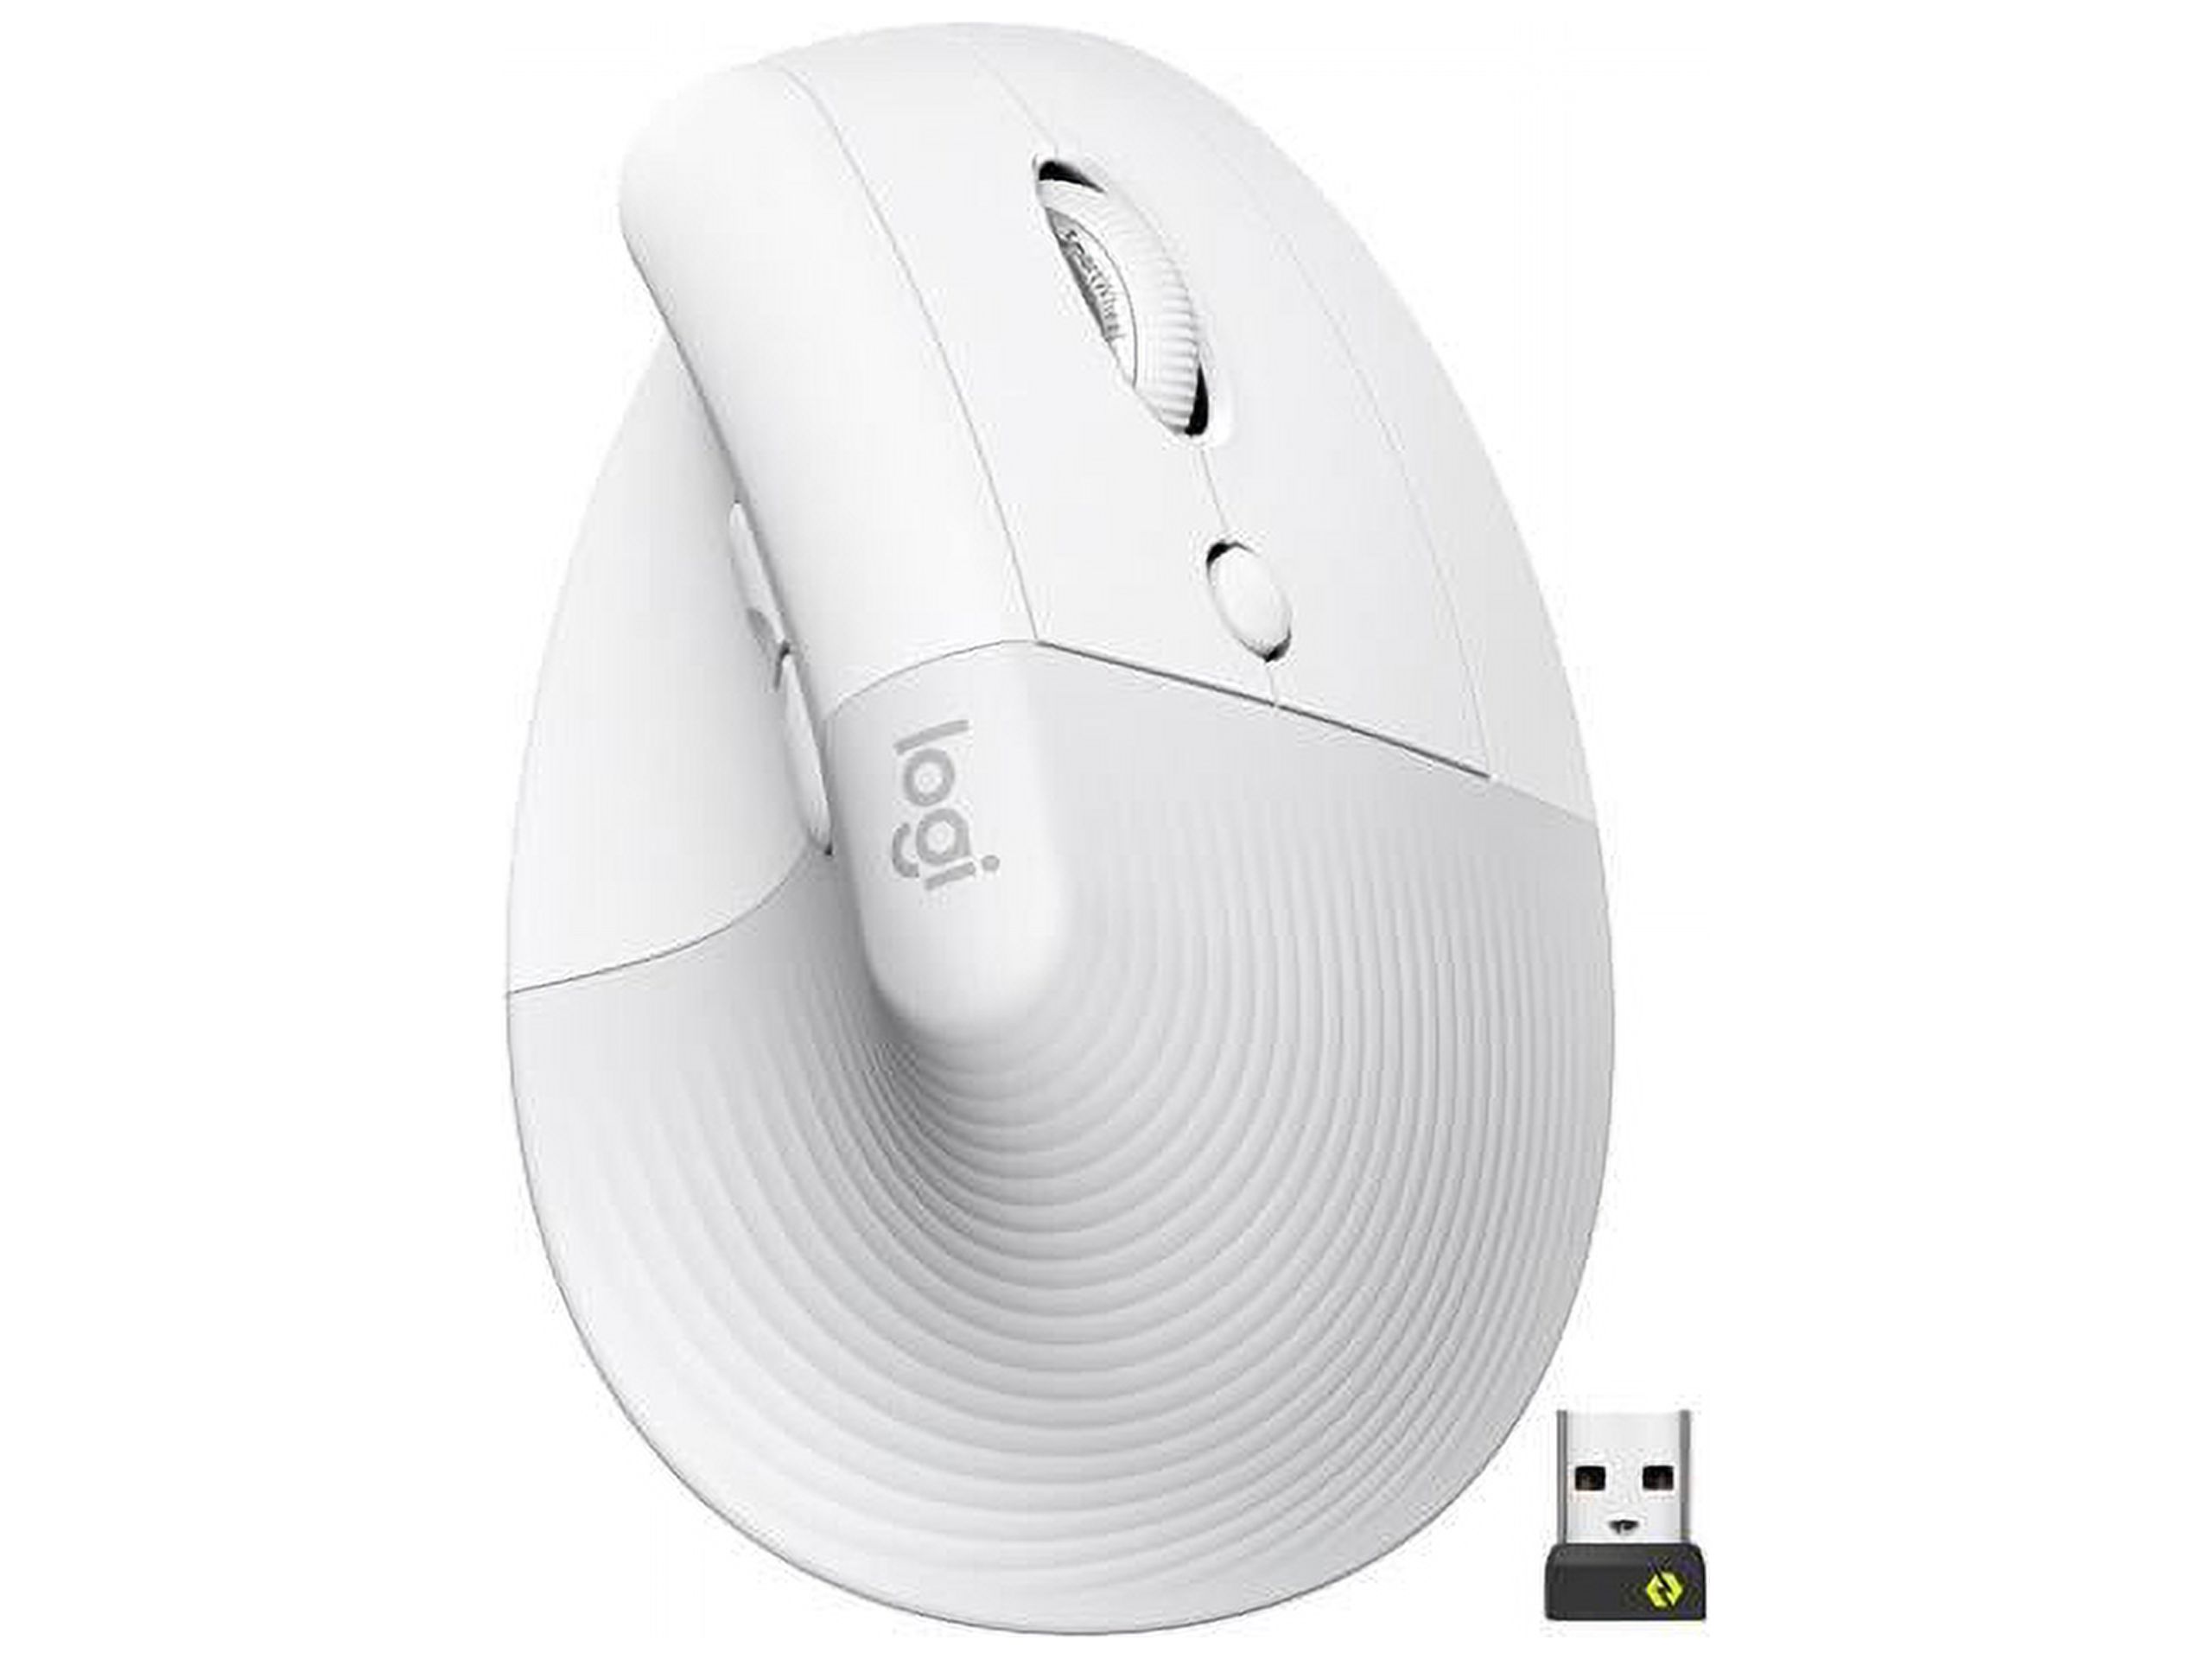 Logitech Lift Vertical Ergonomic Mouse, Wireless, Bluetooth or Logi Bolt USB receiver, Quiet clicks, 4 buttons, compatible with Windows/macOS/iPadOS, Laptop, PC - Off White - image 1 of 10